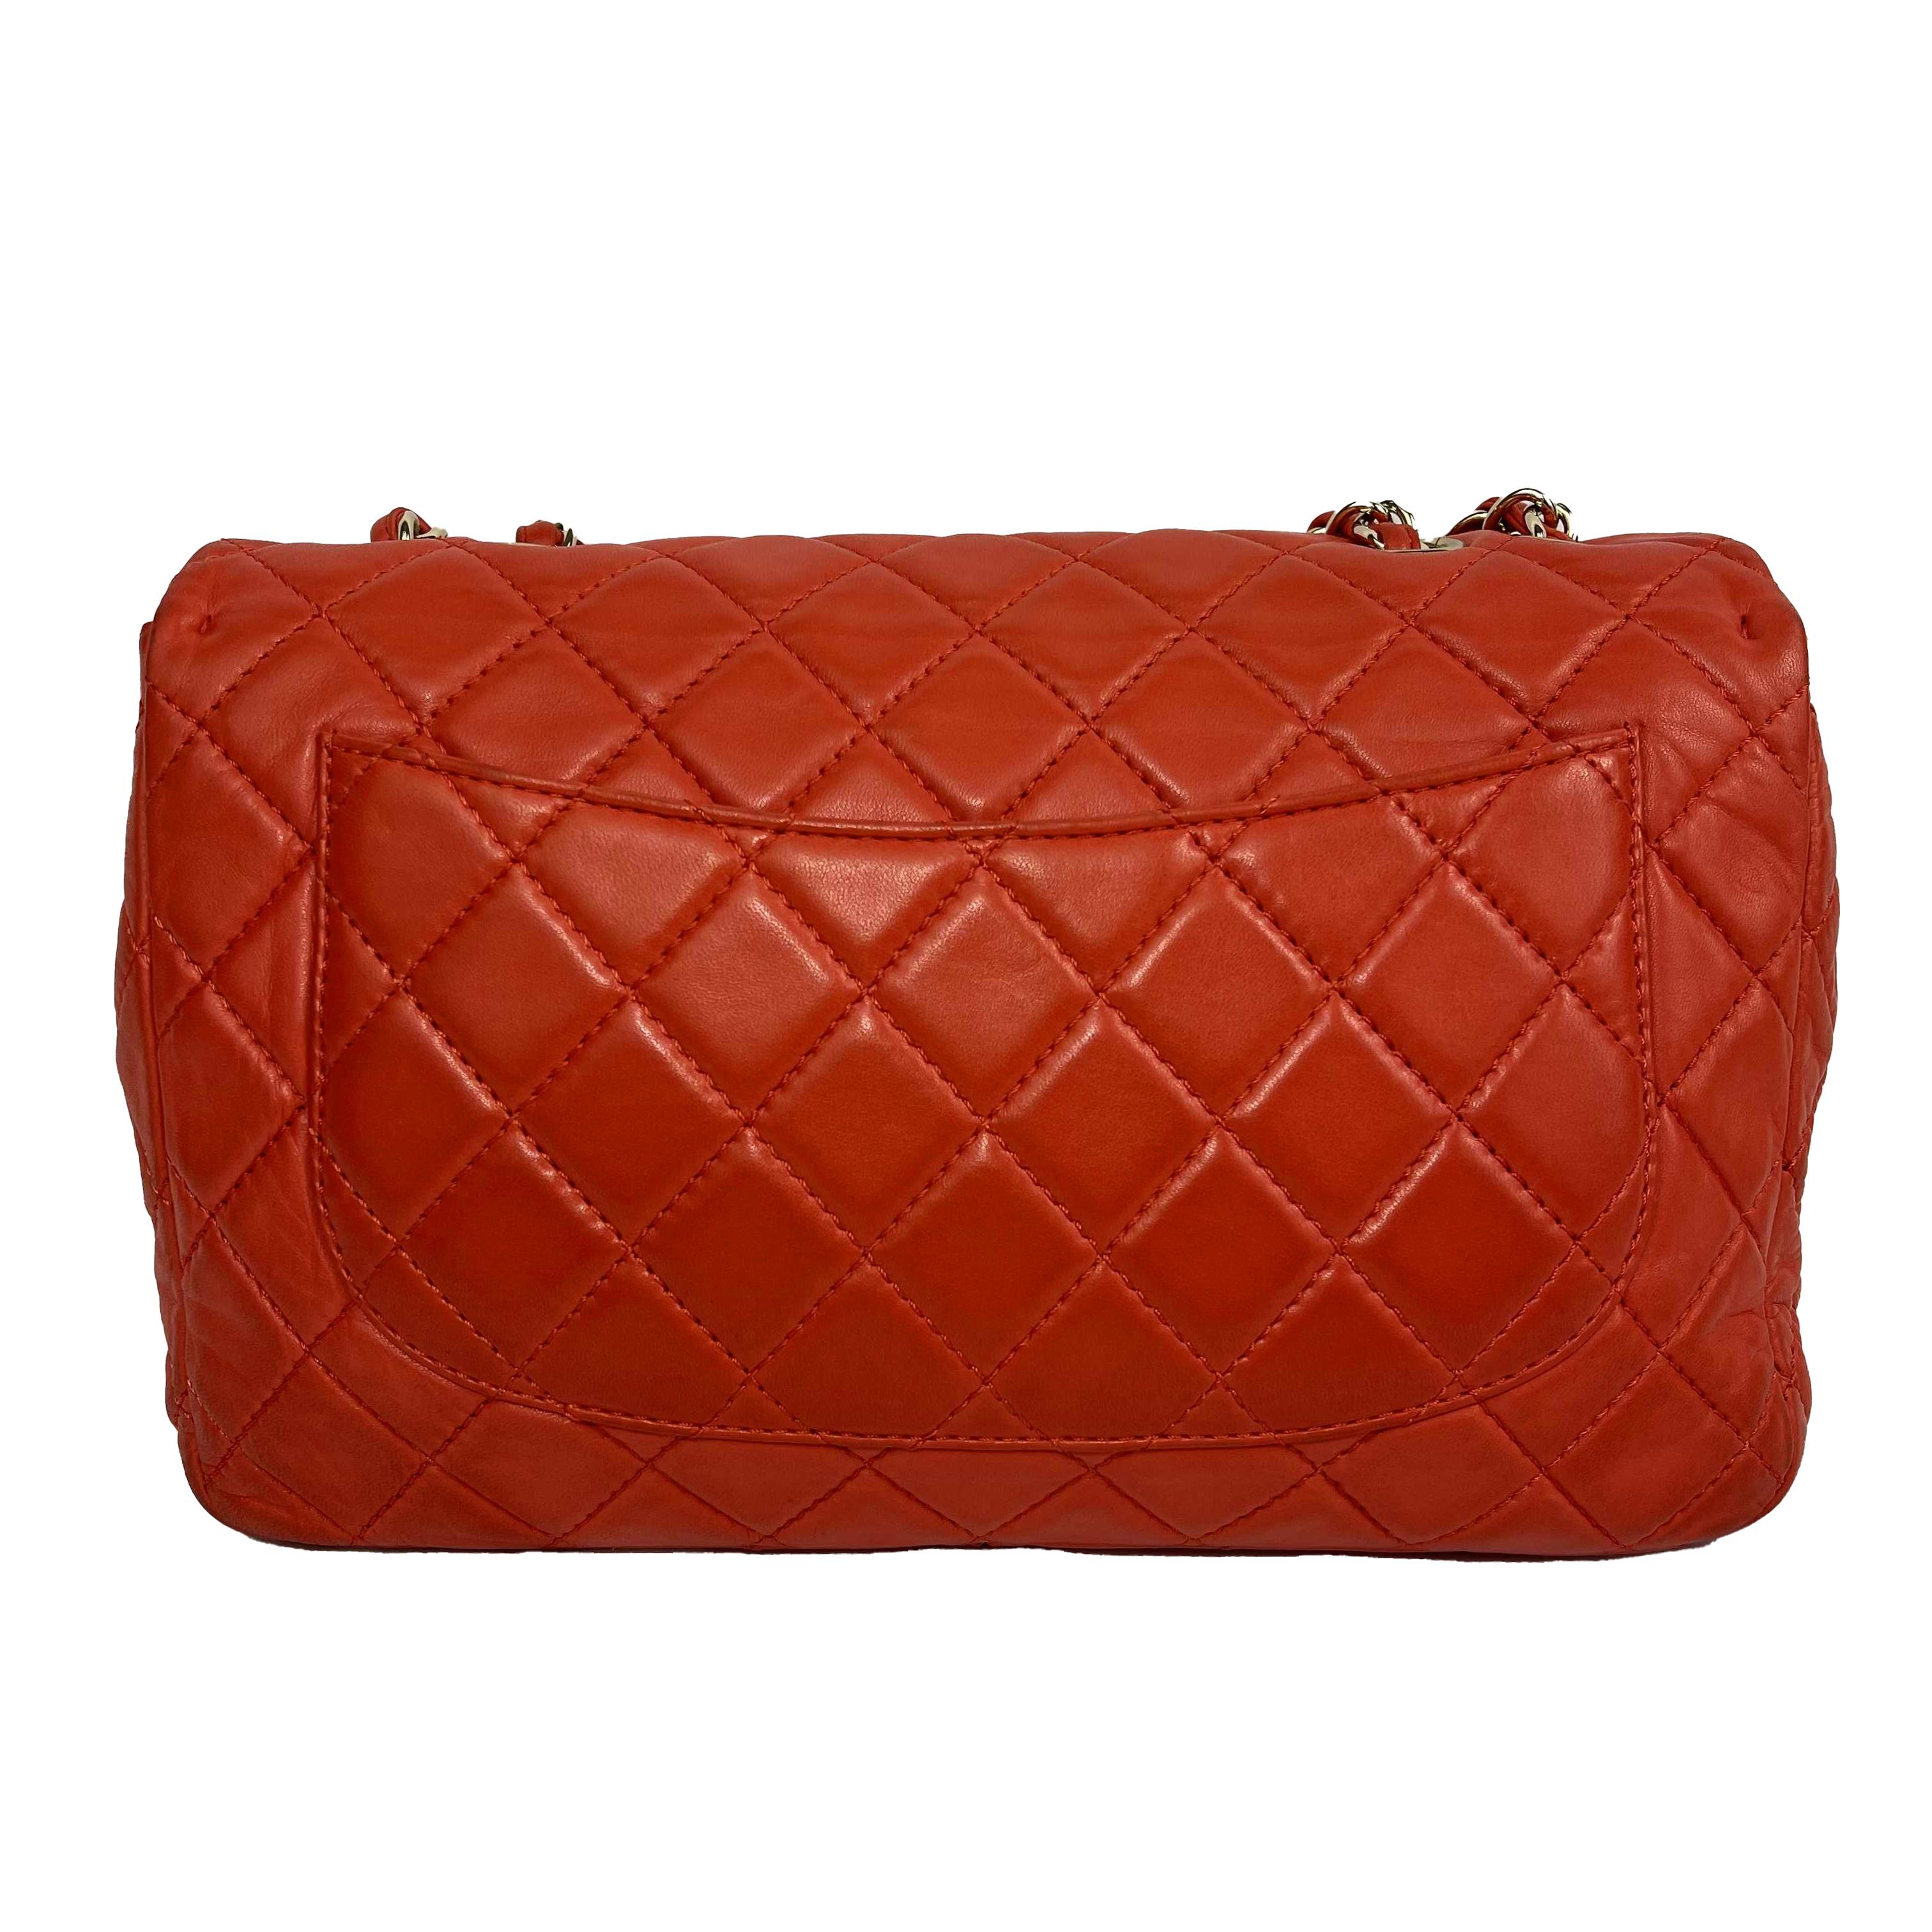 Chanel - Good - Classic Jumbo Single Flap Quilted Lambskin - Champagne Gold, Coral - Handbag

Description

From the 2008 Collection, this Chanel Classic Large Single Flap Quilted Lambskin shoulder bag features a champagne-gold tone turn-lock CC